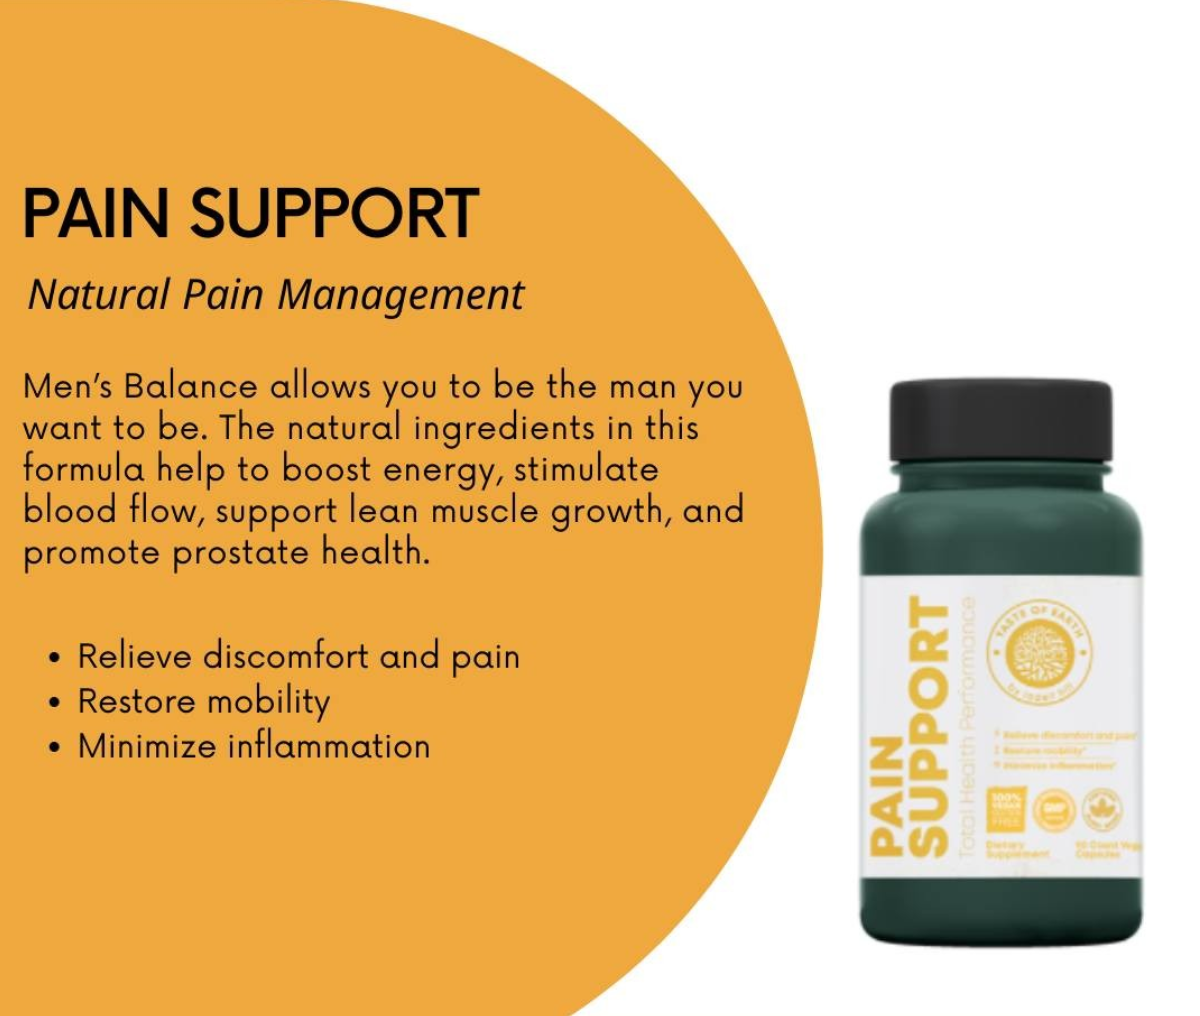 PAIN SUPPORT